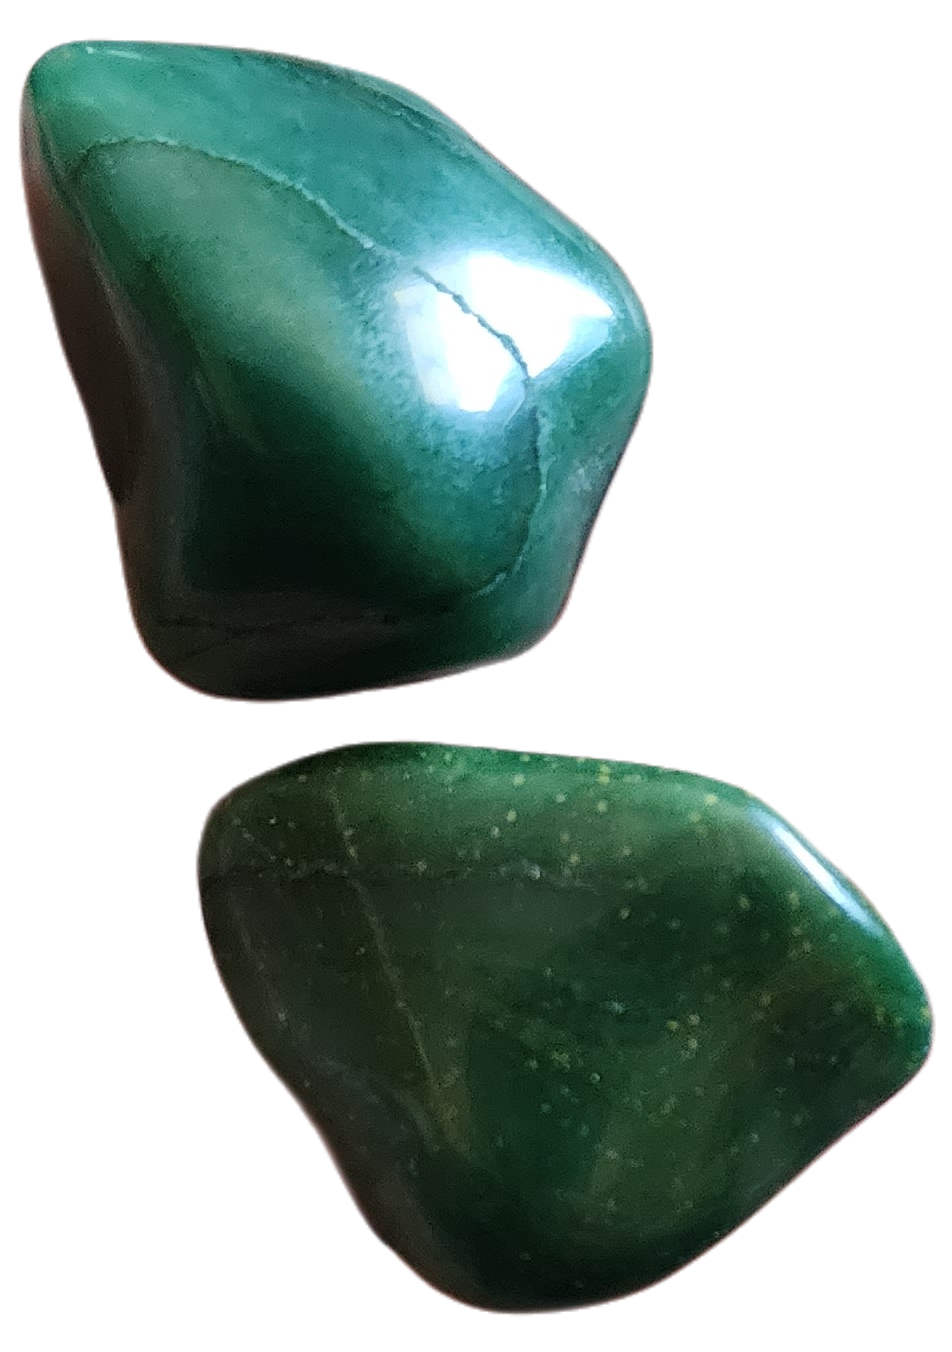 Buddstone Polished Tumbles from South Africa - Ancestral Wisdom, Strength, Kundalini Activation